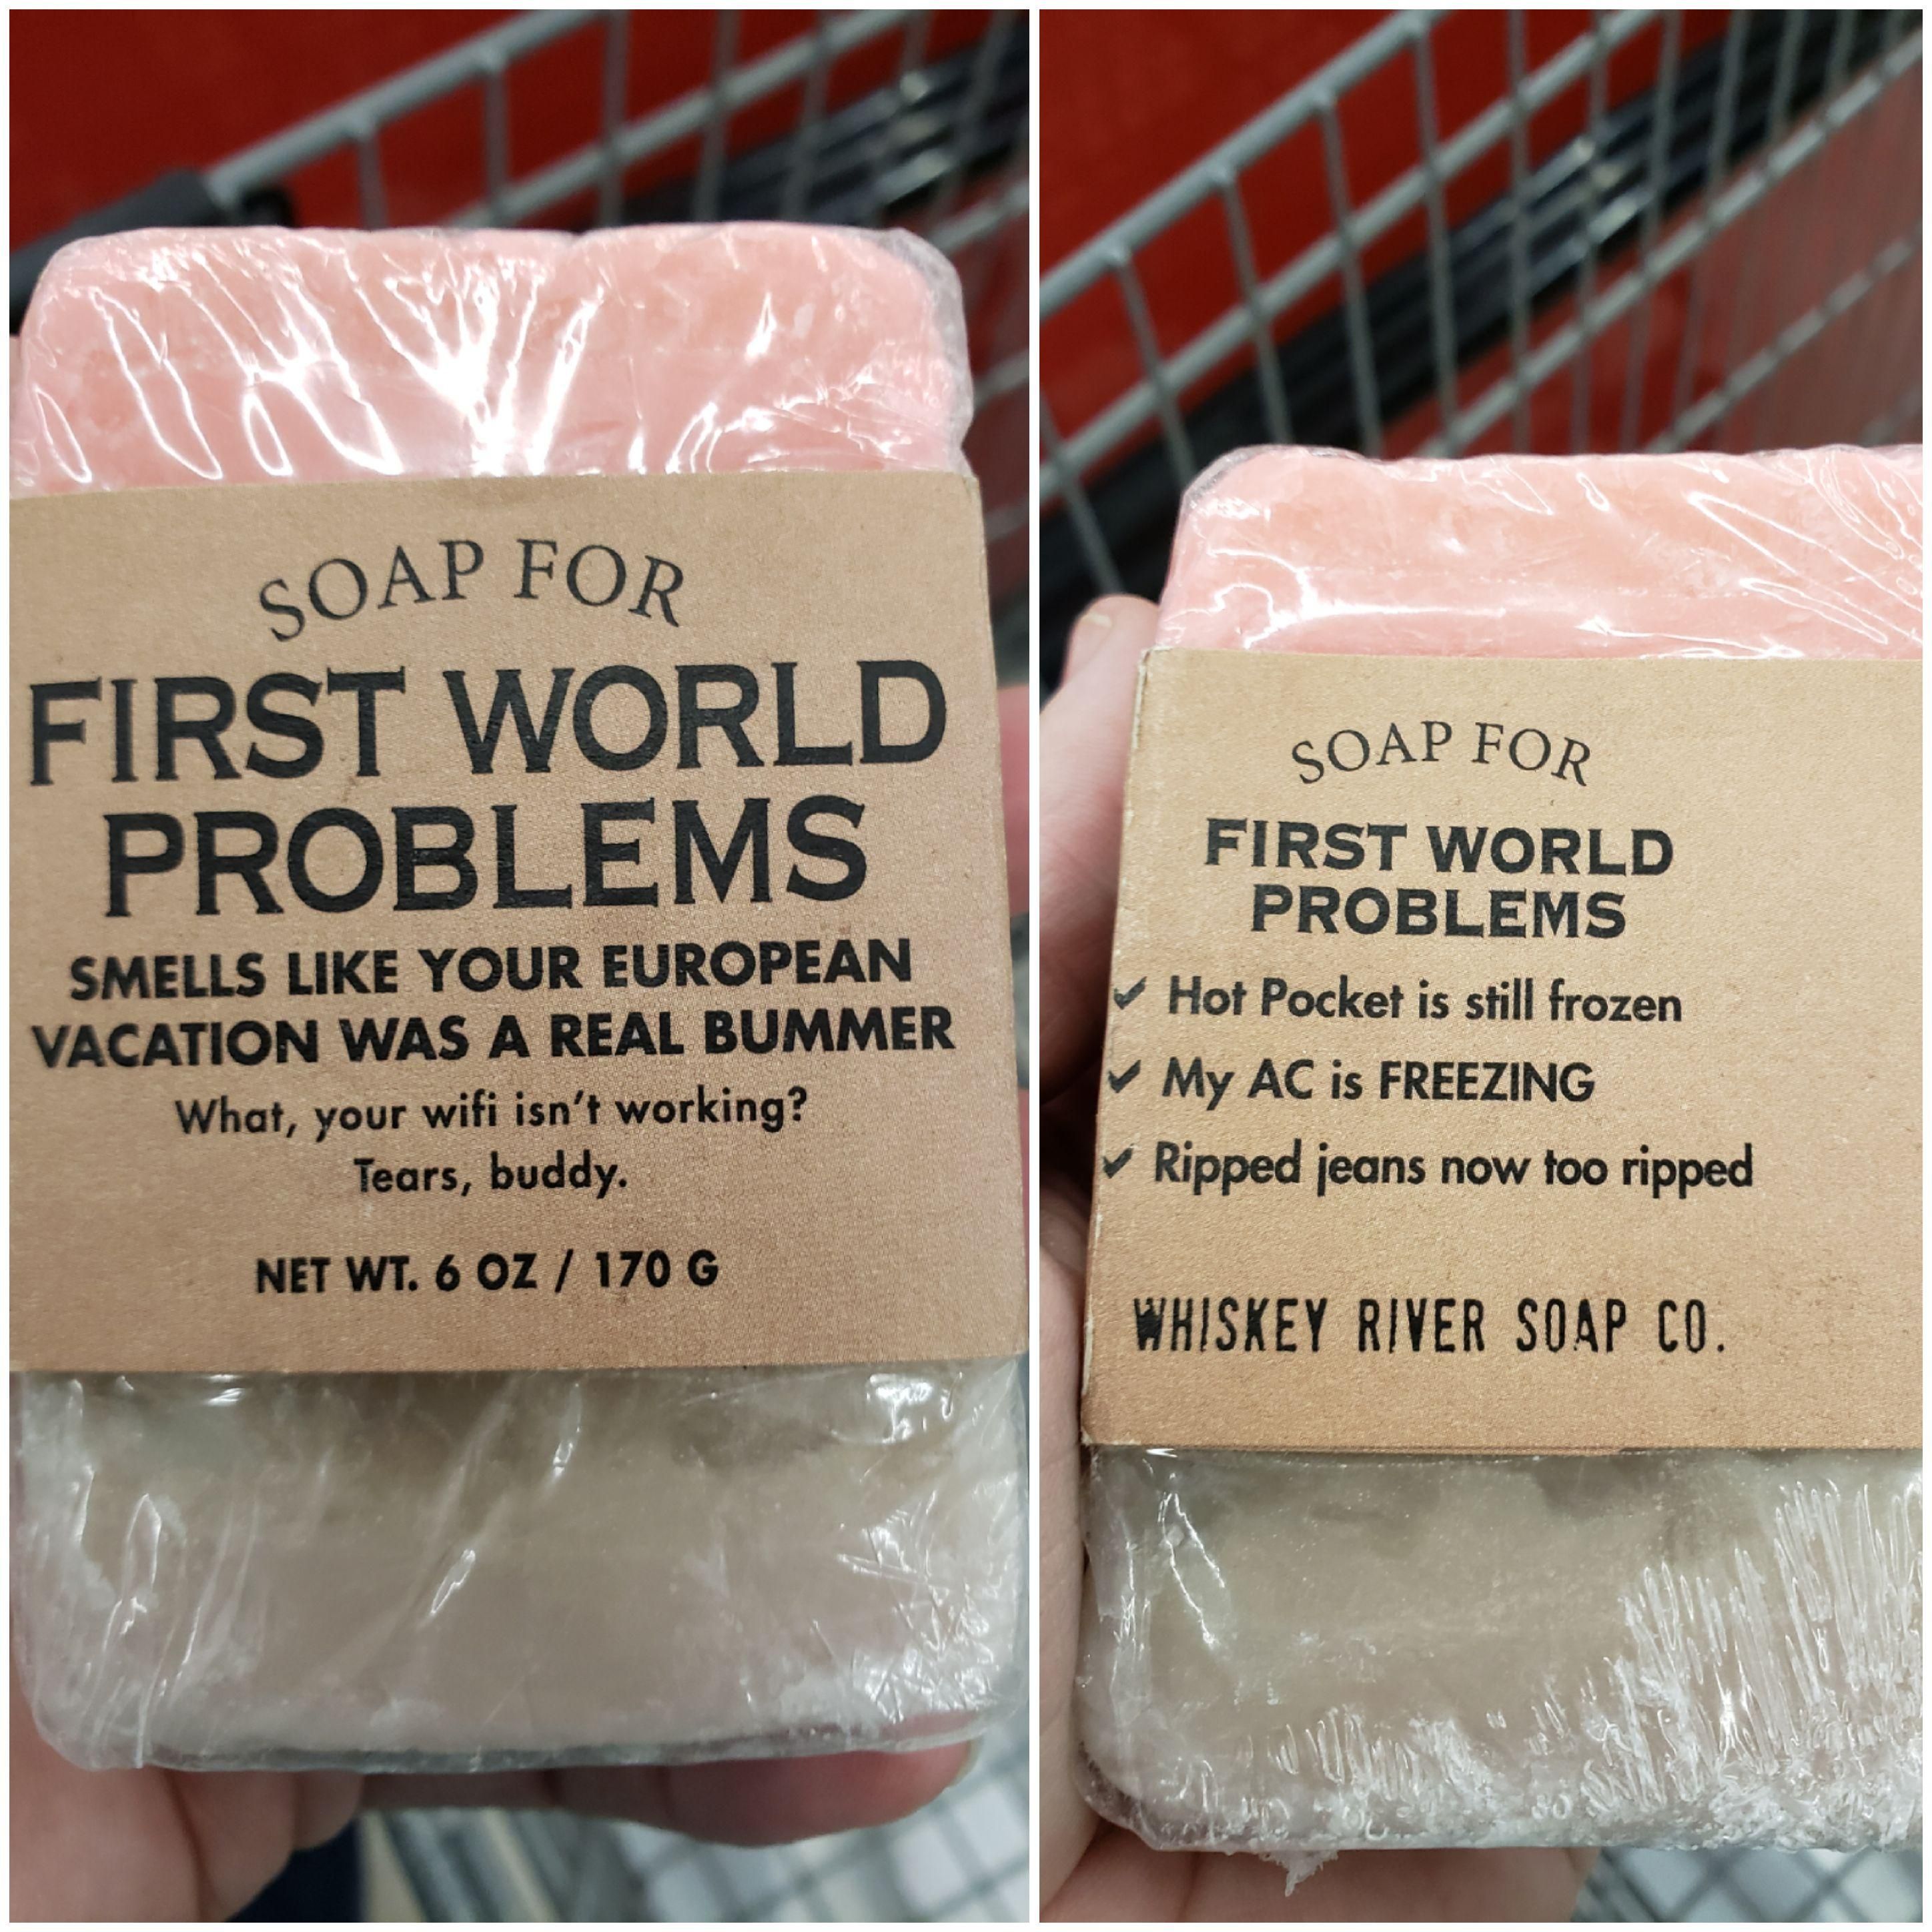 I found a new soap